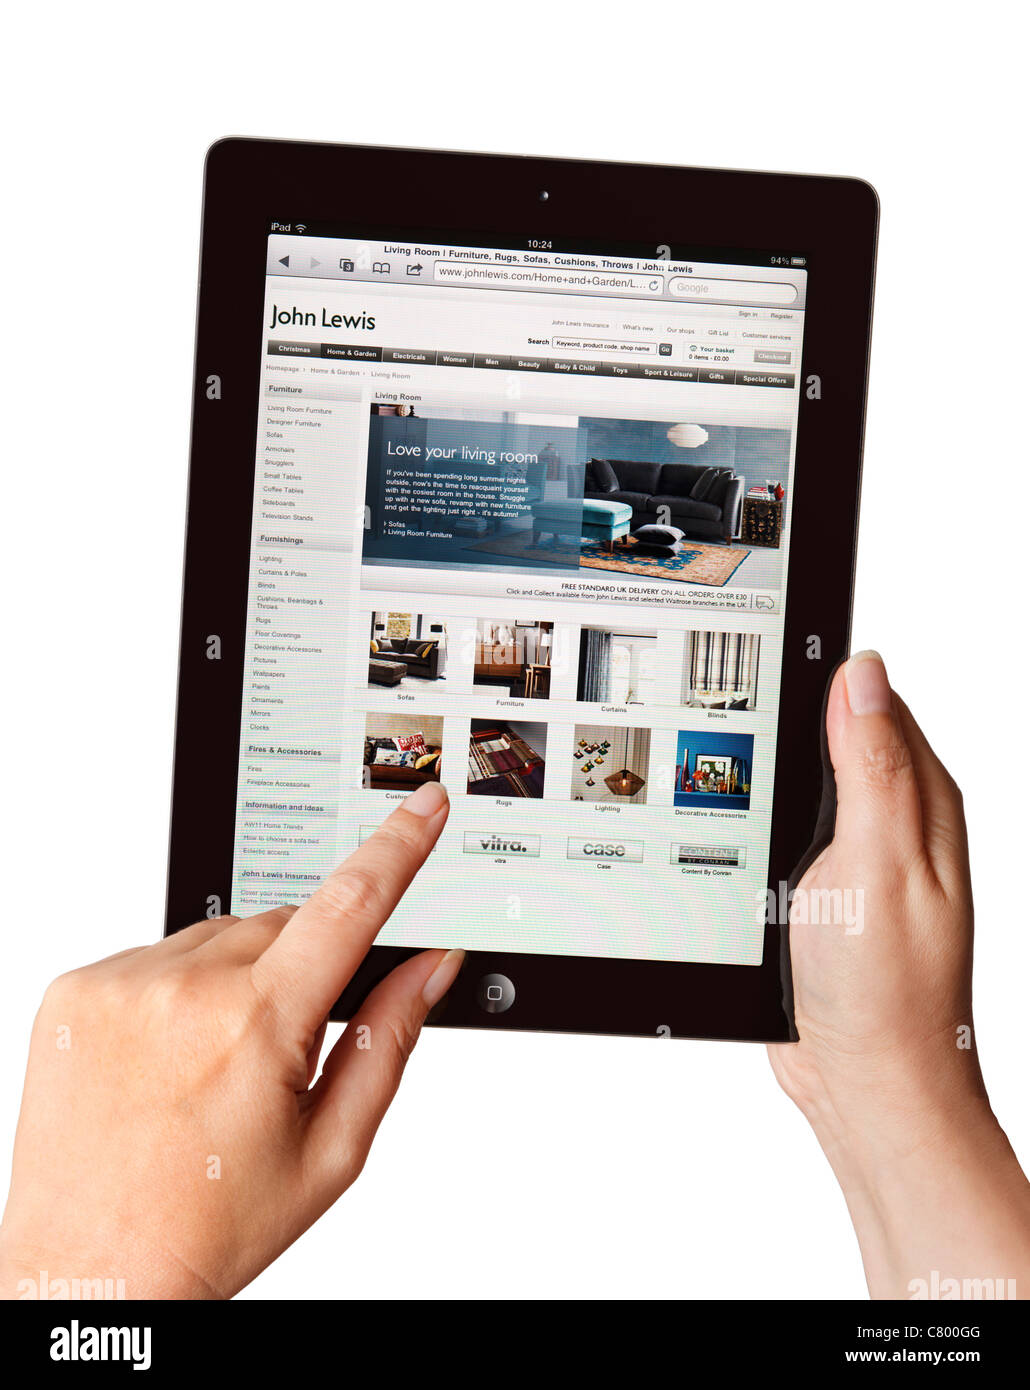 Hands holding an iPad and using the John Lewis website Stock Photo